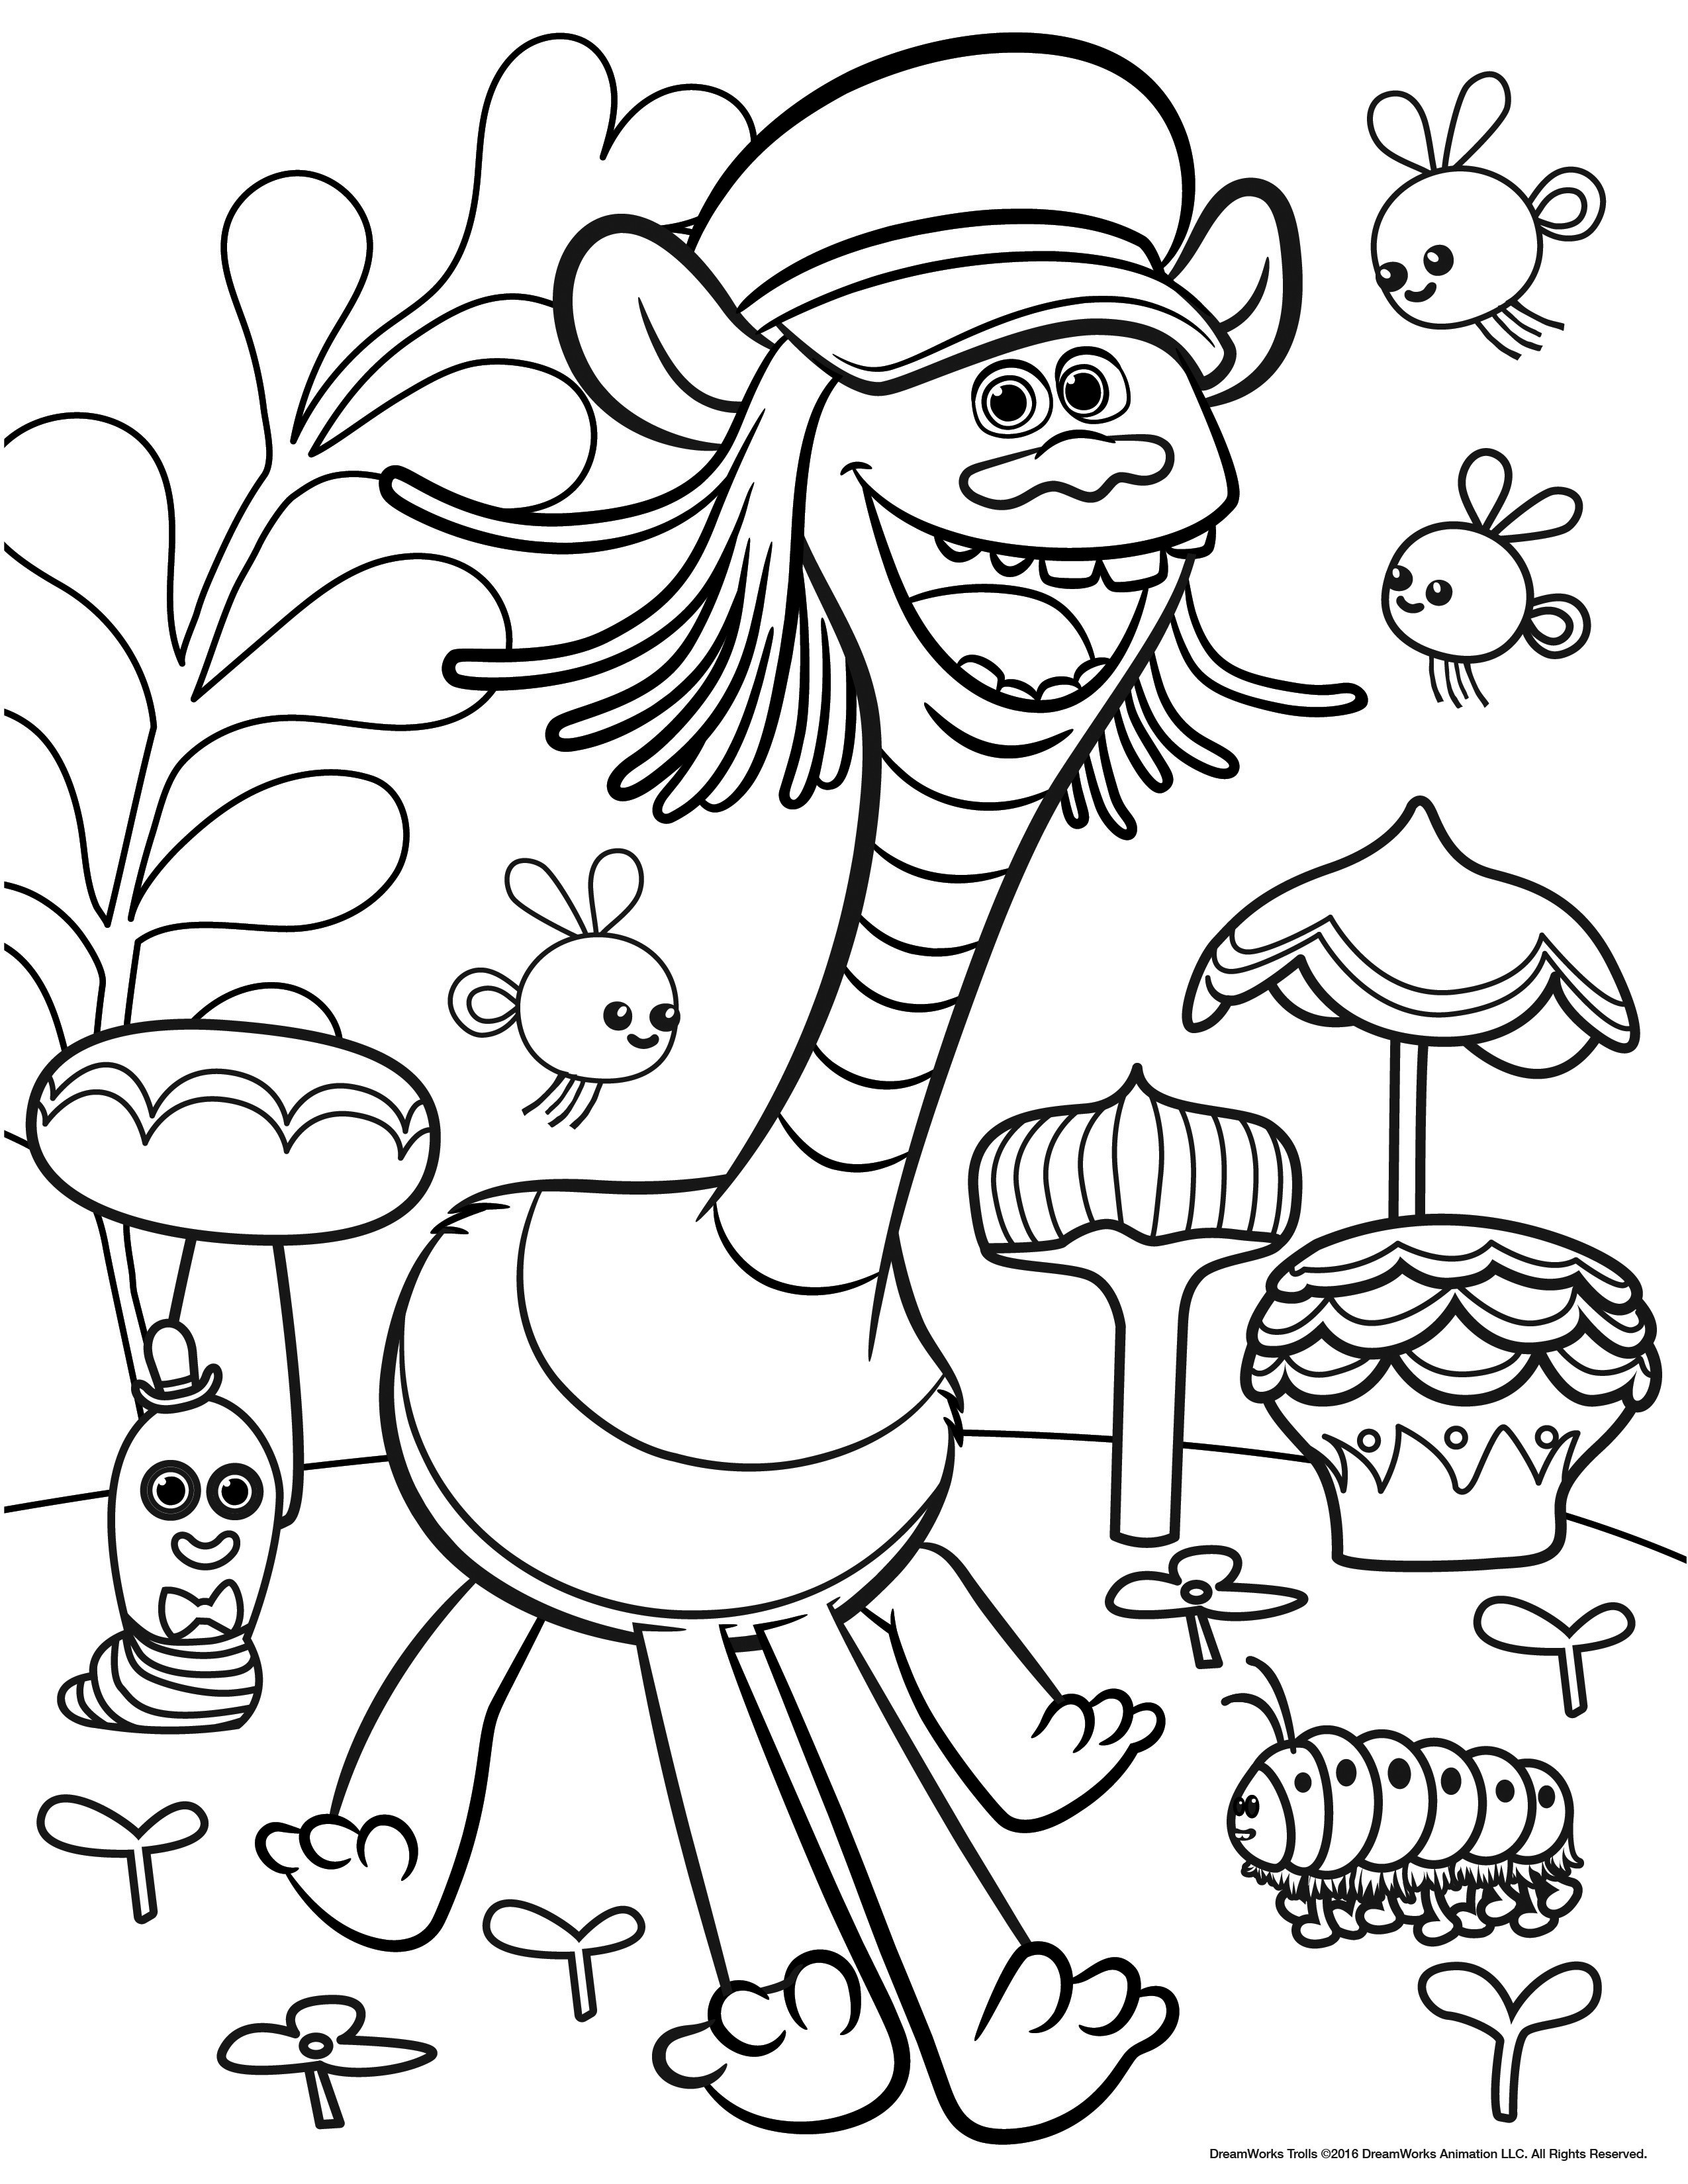 FREE Christmas 21+ Coloring Trolls Pages for Adults and Kids